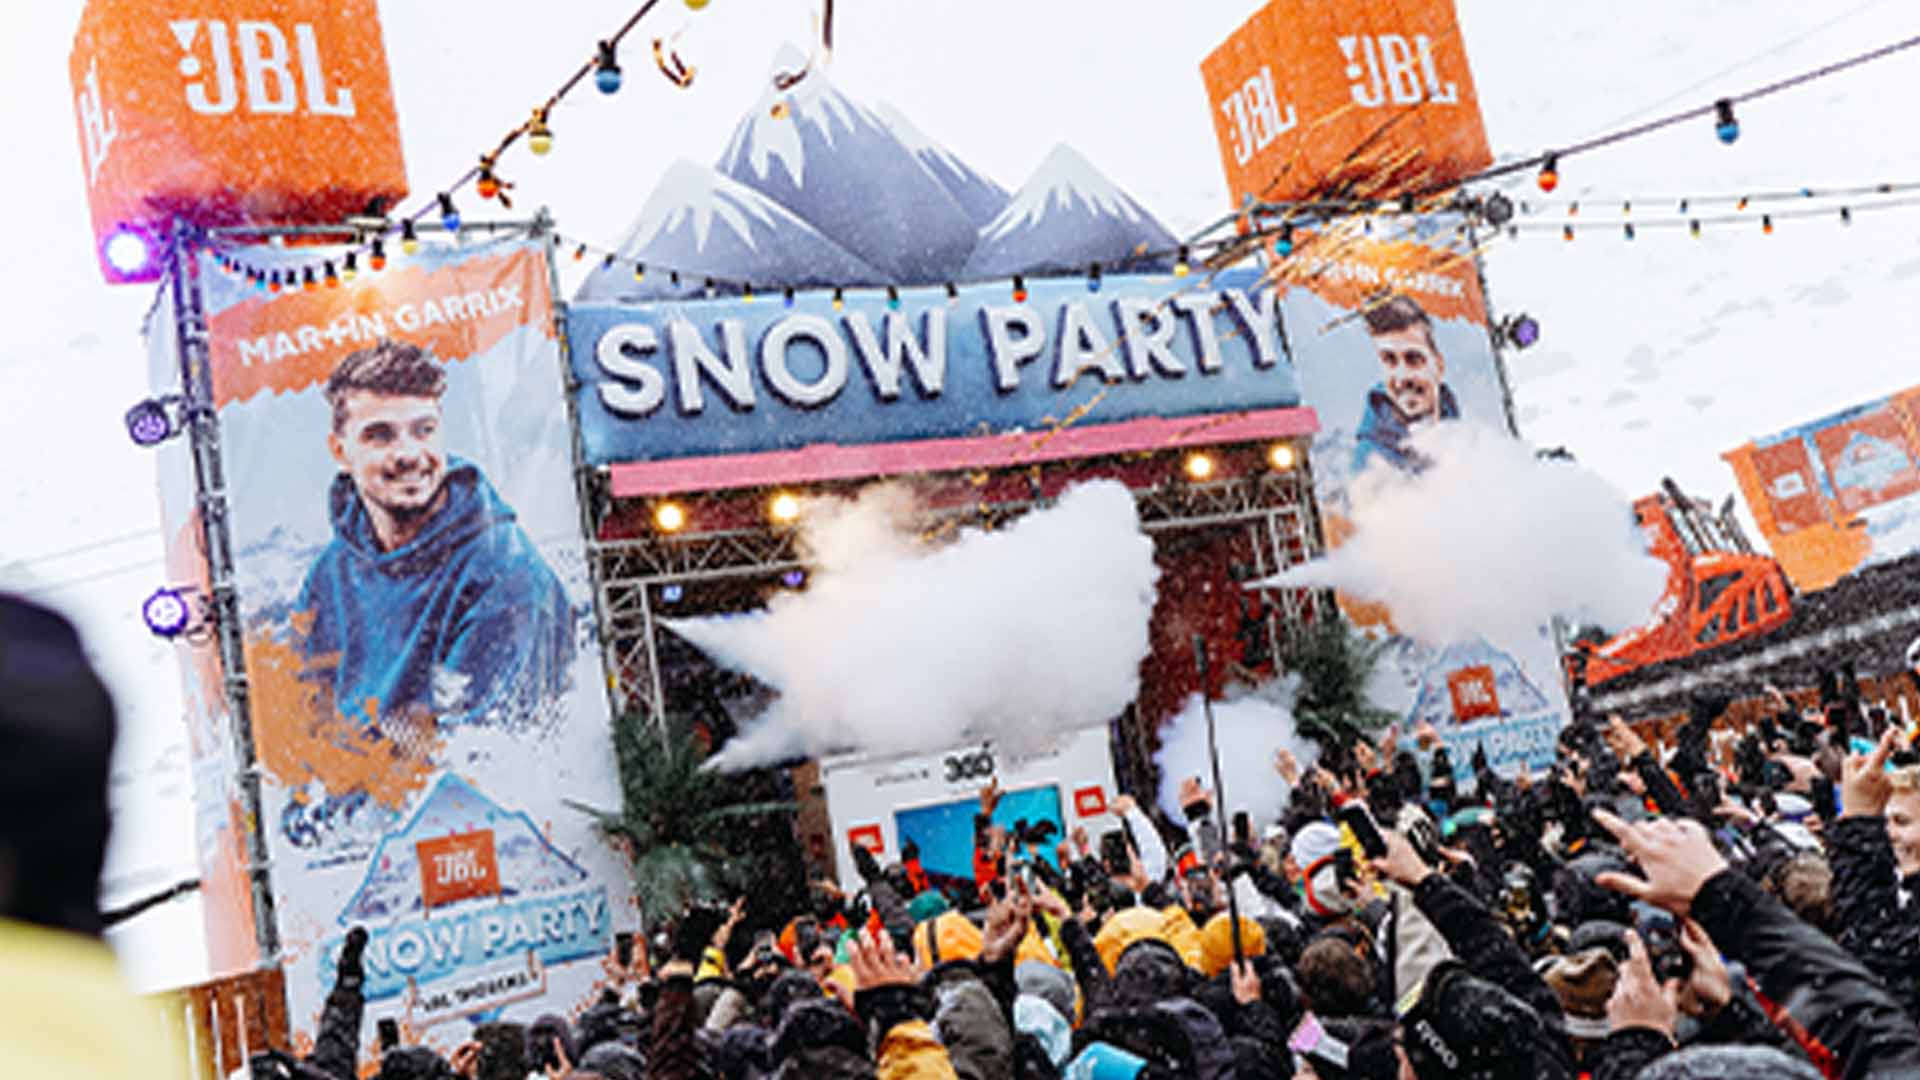 musica / JBL Snow Party